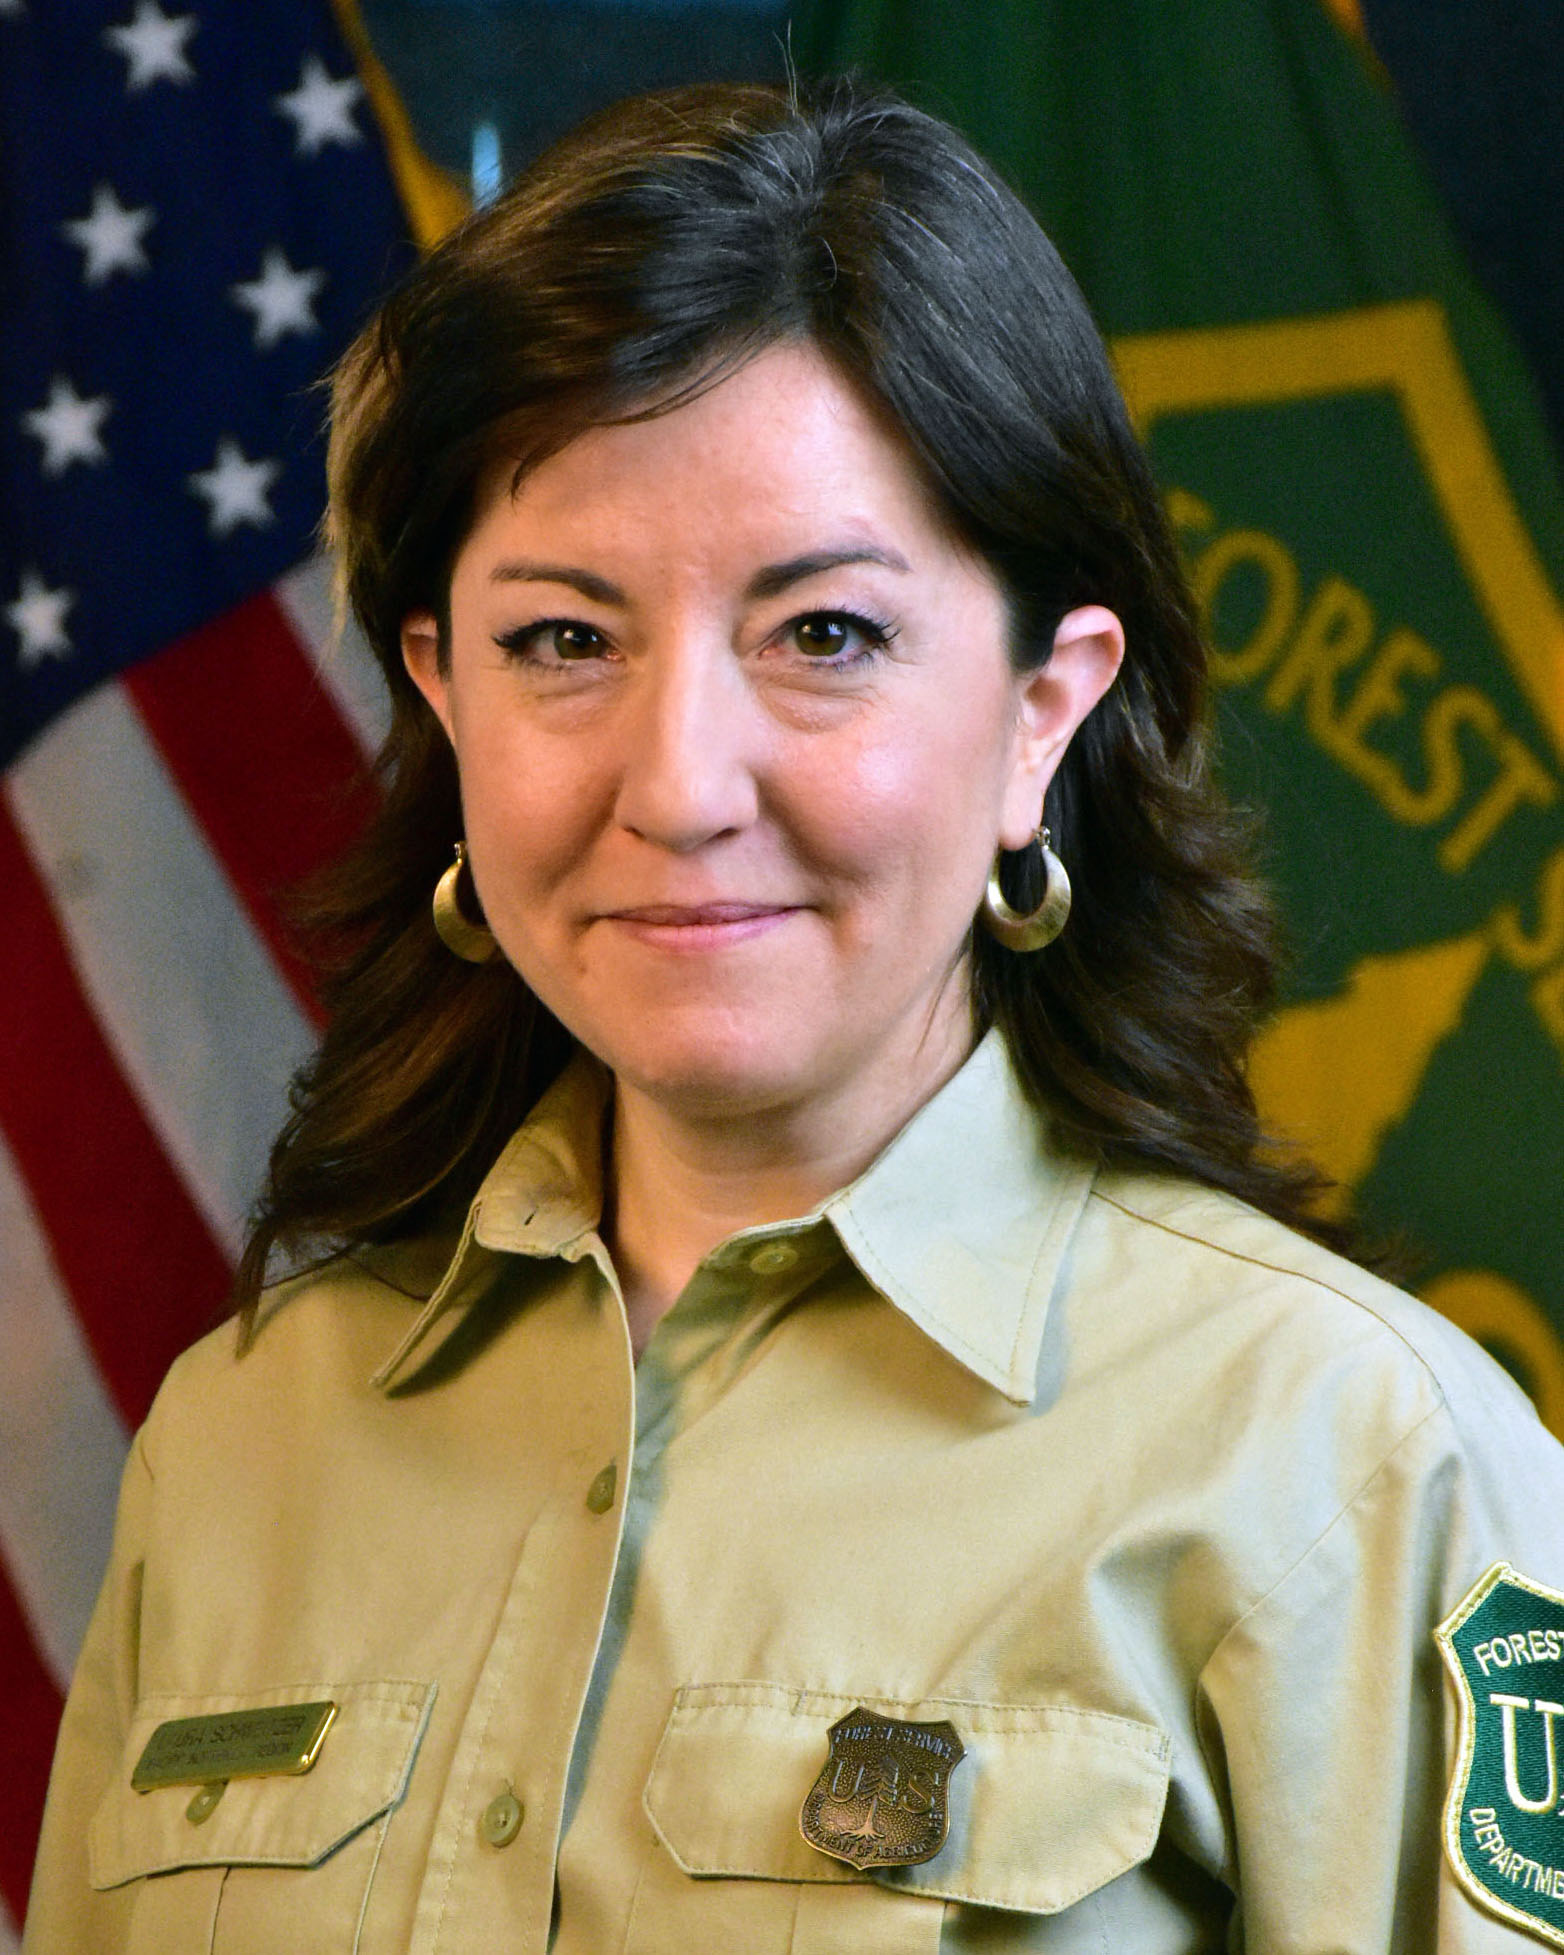 A portrait of a women in the forest service uniform with US and forest service flag behind her.